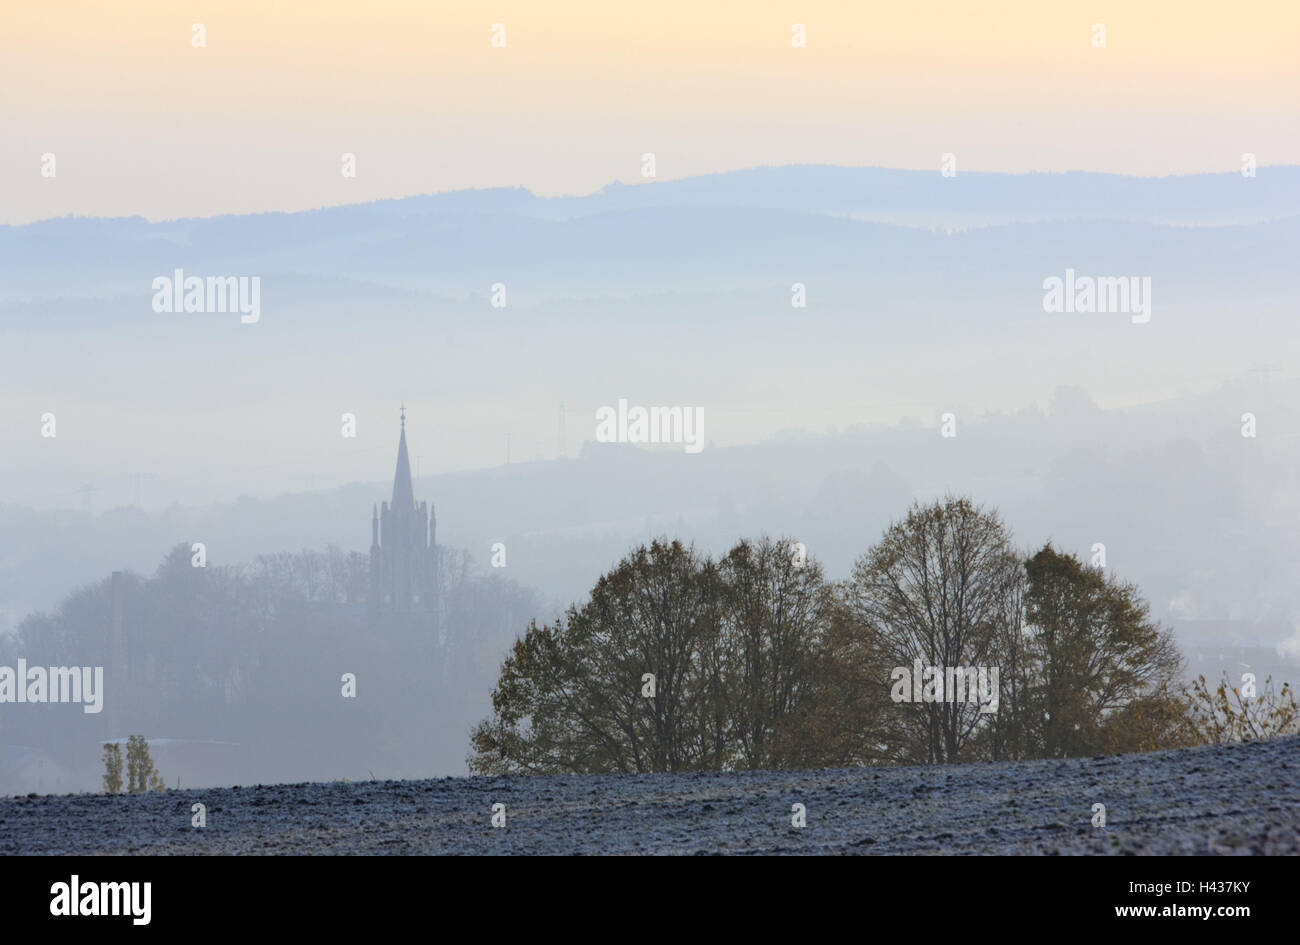 Germany, Thuringia, king's lake, trees, steeple, view, fog, clouds, place of interest, destination, tourism, scenery, hill, field, season, autumn, deserted, Schiefergebirge, church, tower, Stock Photo